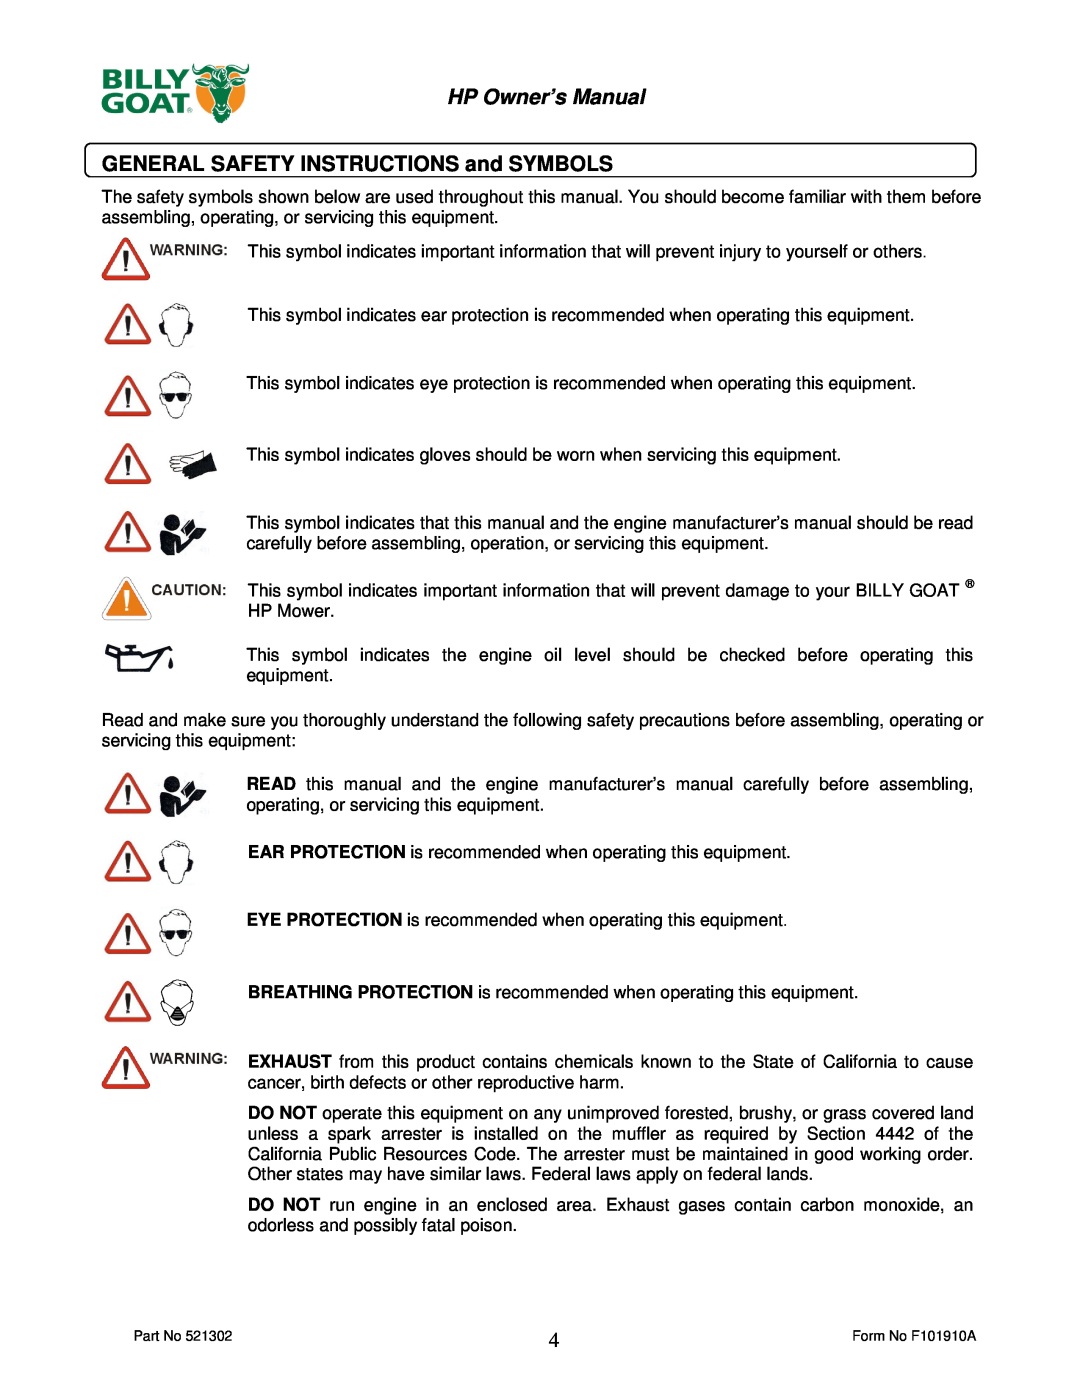 Billy Goat HP3400 owner manual GENERAL SAFETY INSTRUCTIONS and SYMBOLS, HP Owner’s Manual 